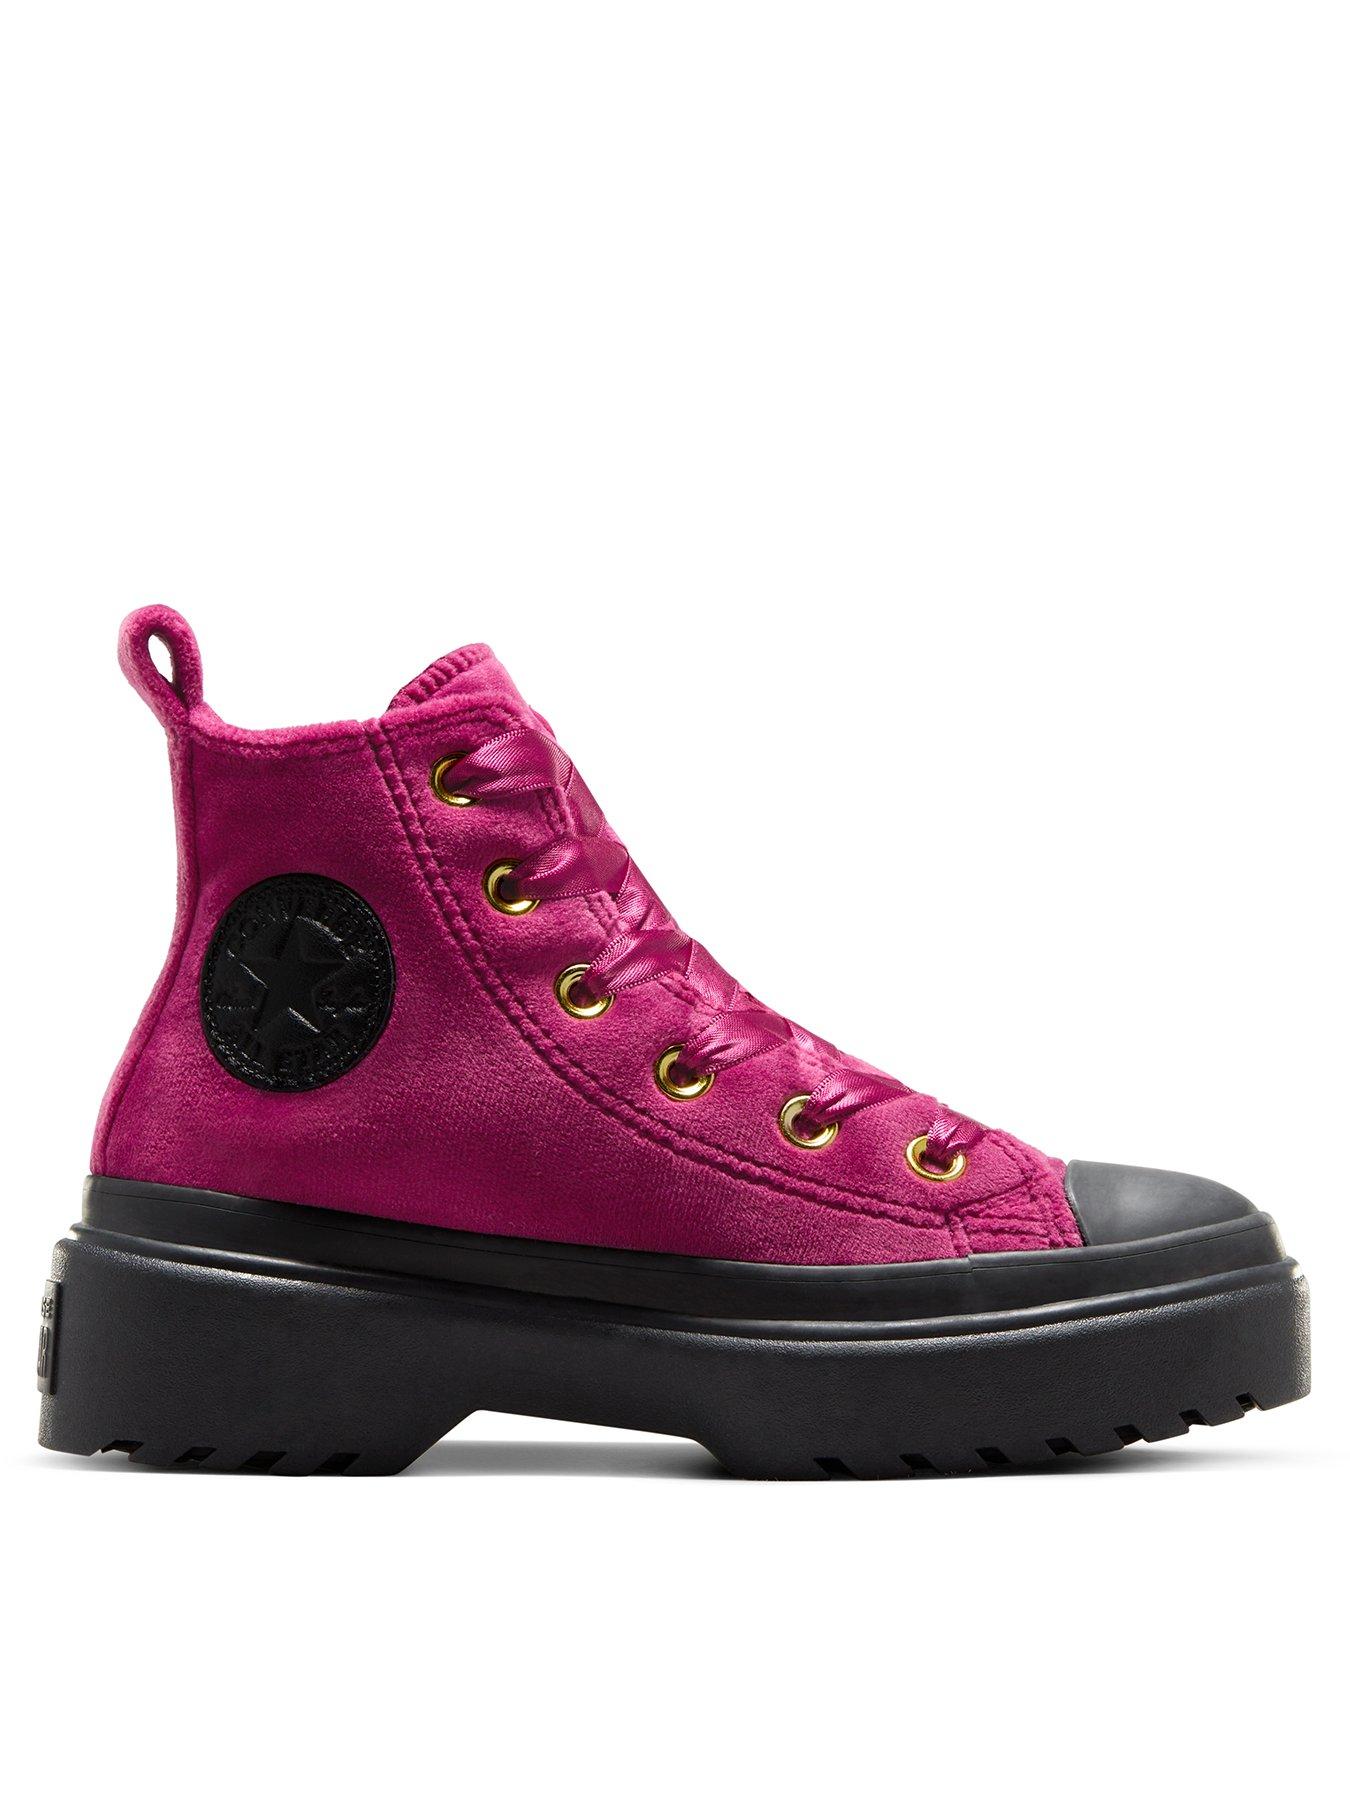 Converse Kids Lugged Lift Platform Velvet Trainers - Pink, Pink, Size 11 Younger